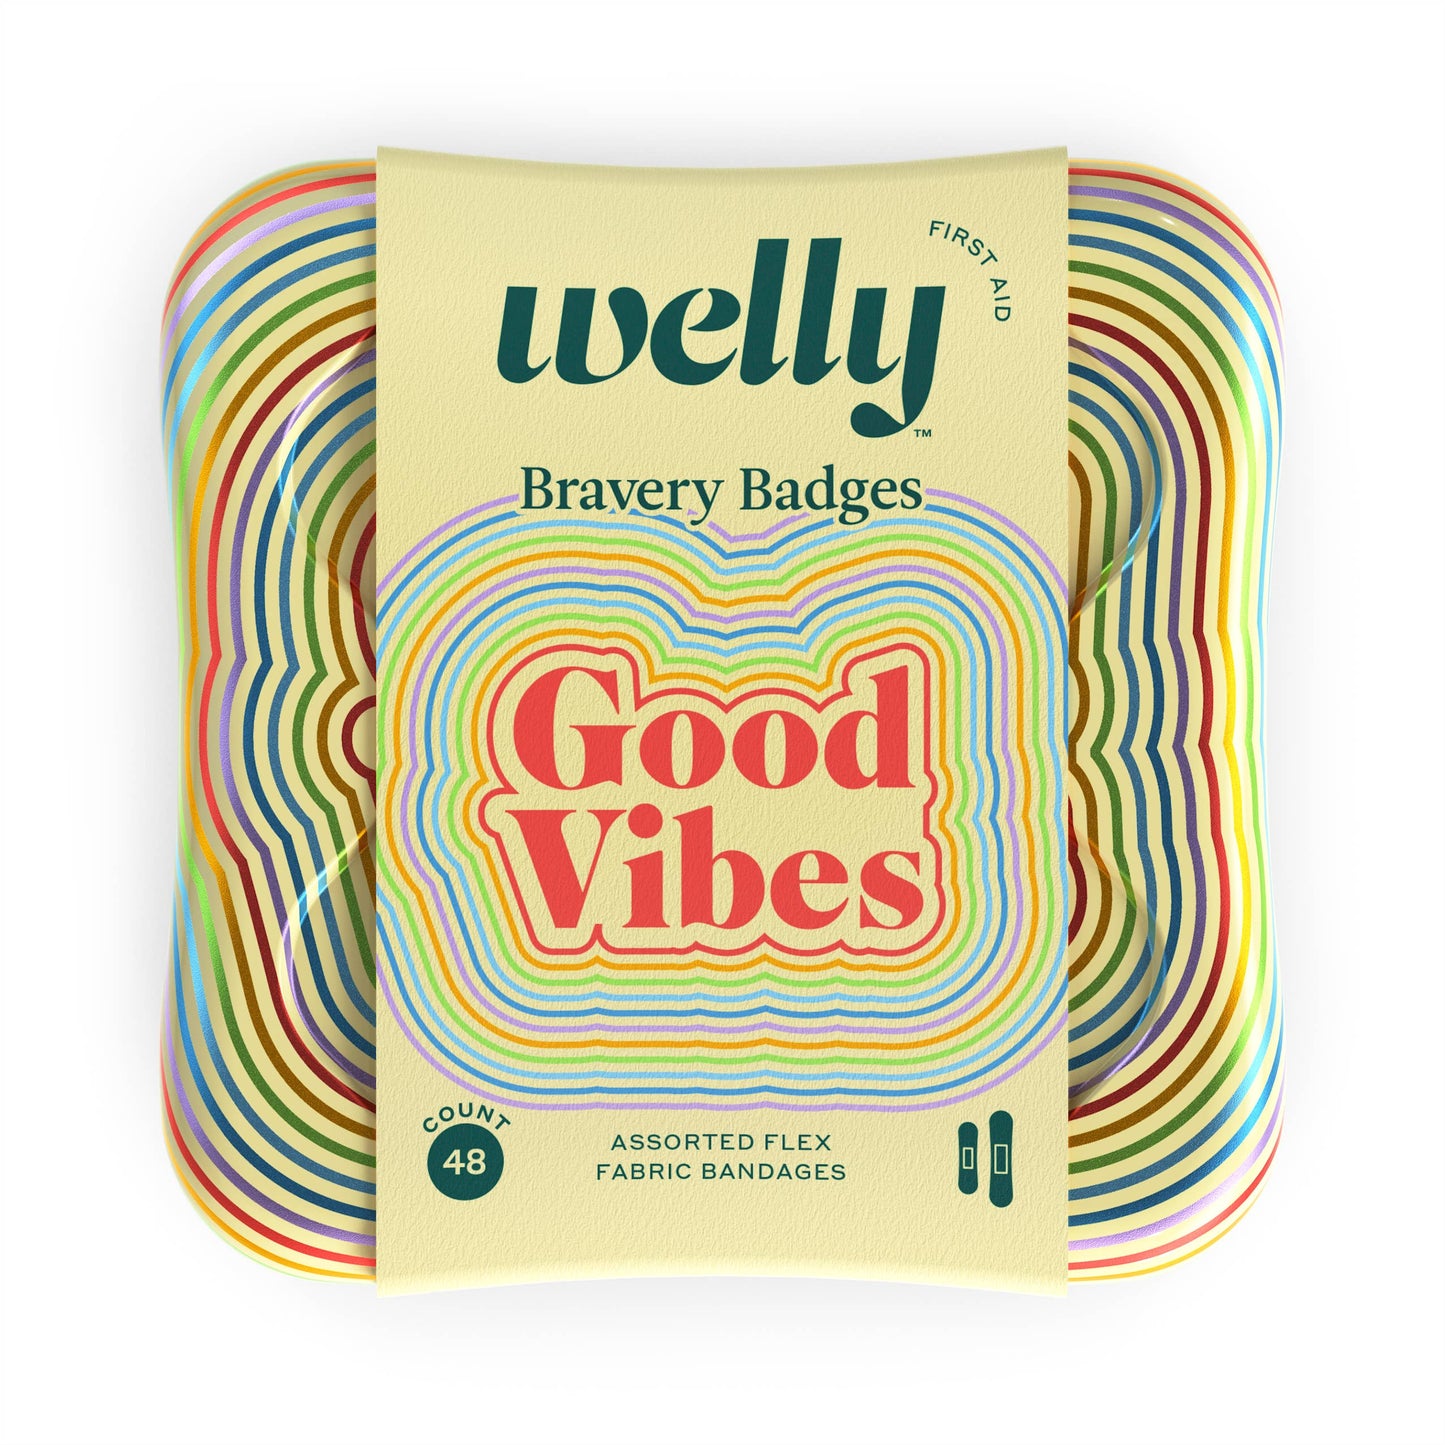 Good Vibes Bravery Badges bandage 48 pack by Welly